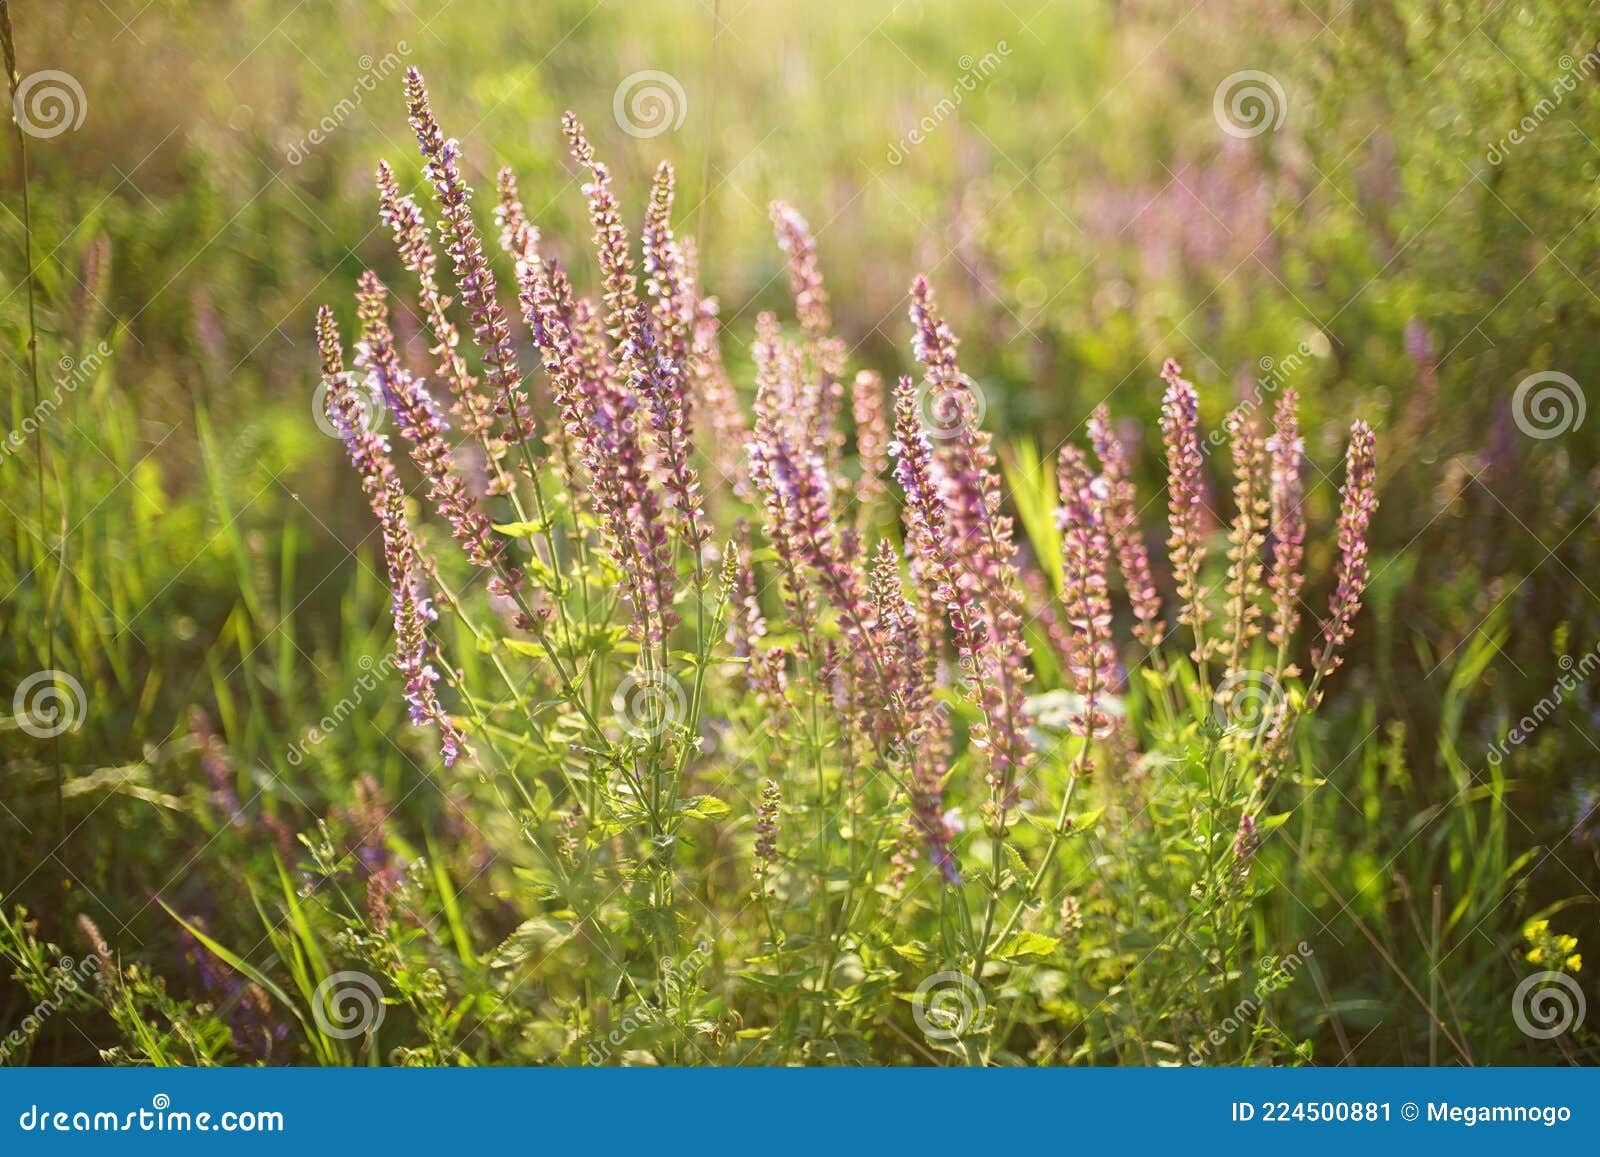 Wild Violet Flowers Growing in Green Grass. Sunny Summer Field Stock ...